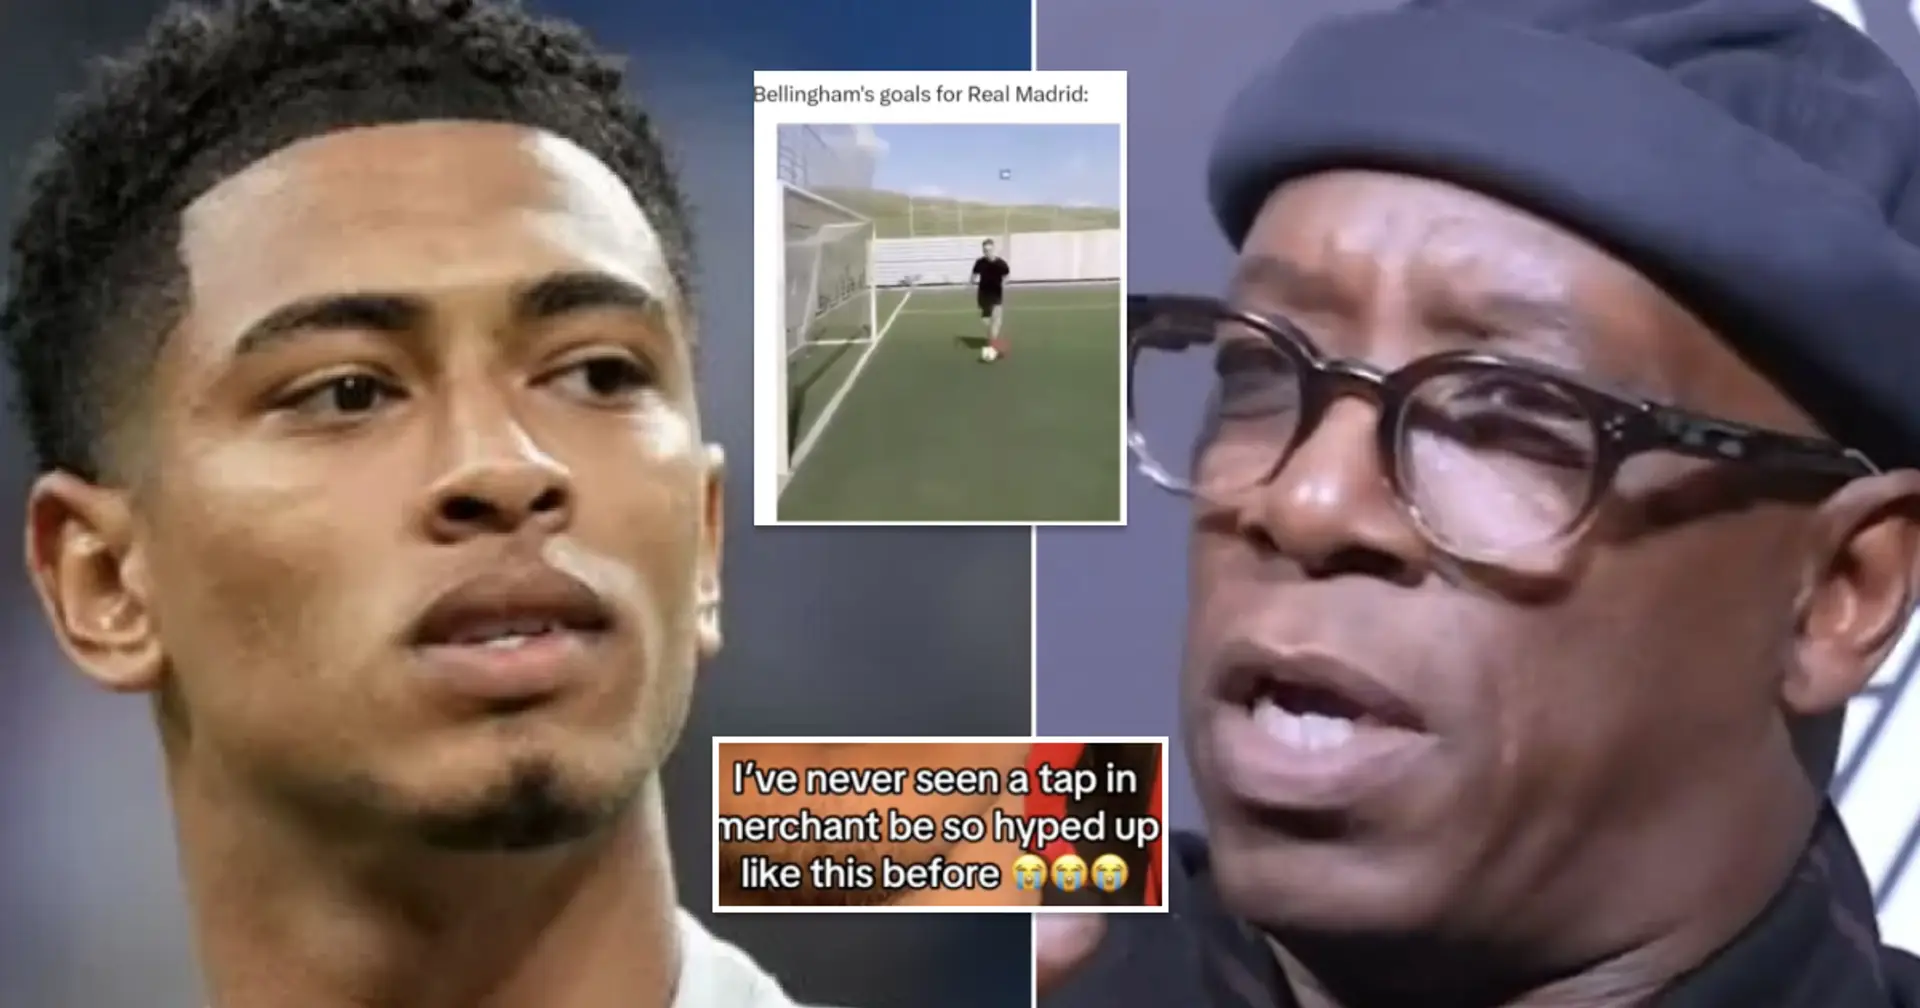 'They don't understand one thing': Arsenal legend Ian Wright mocks fans who troll Bellingham for scoring only tap-ins